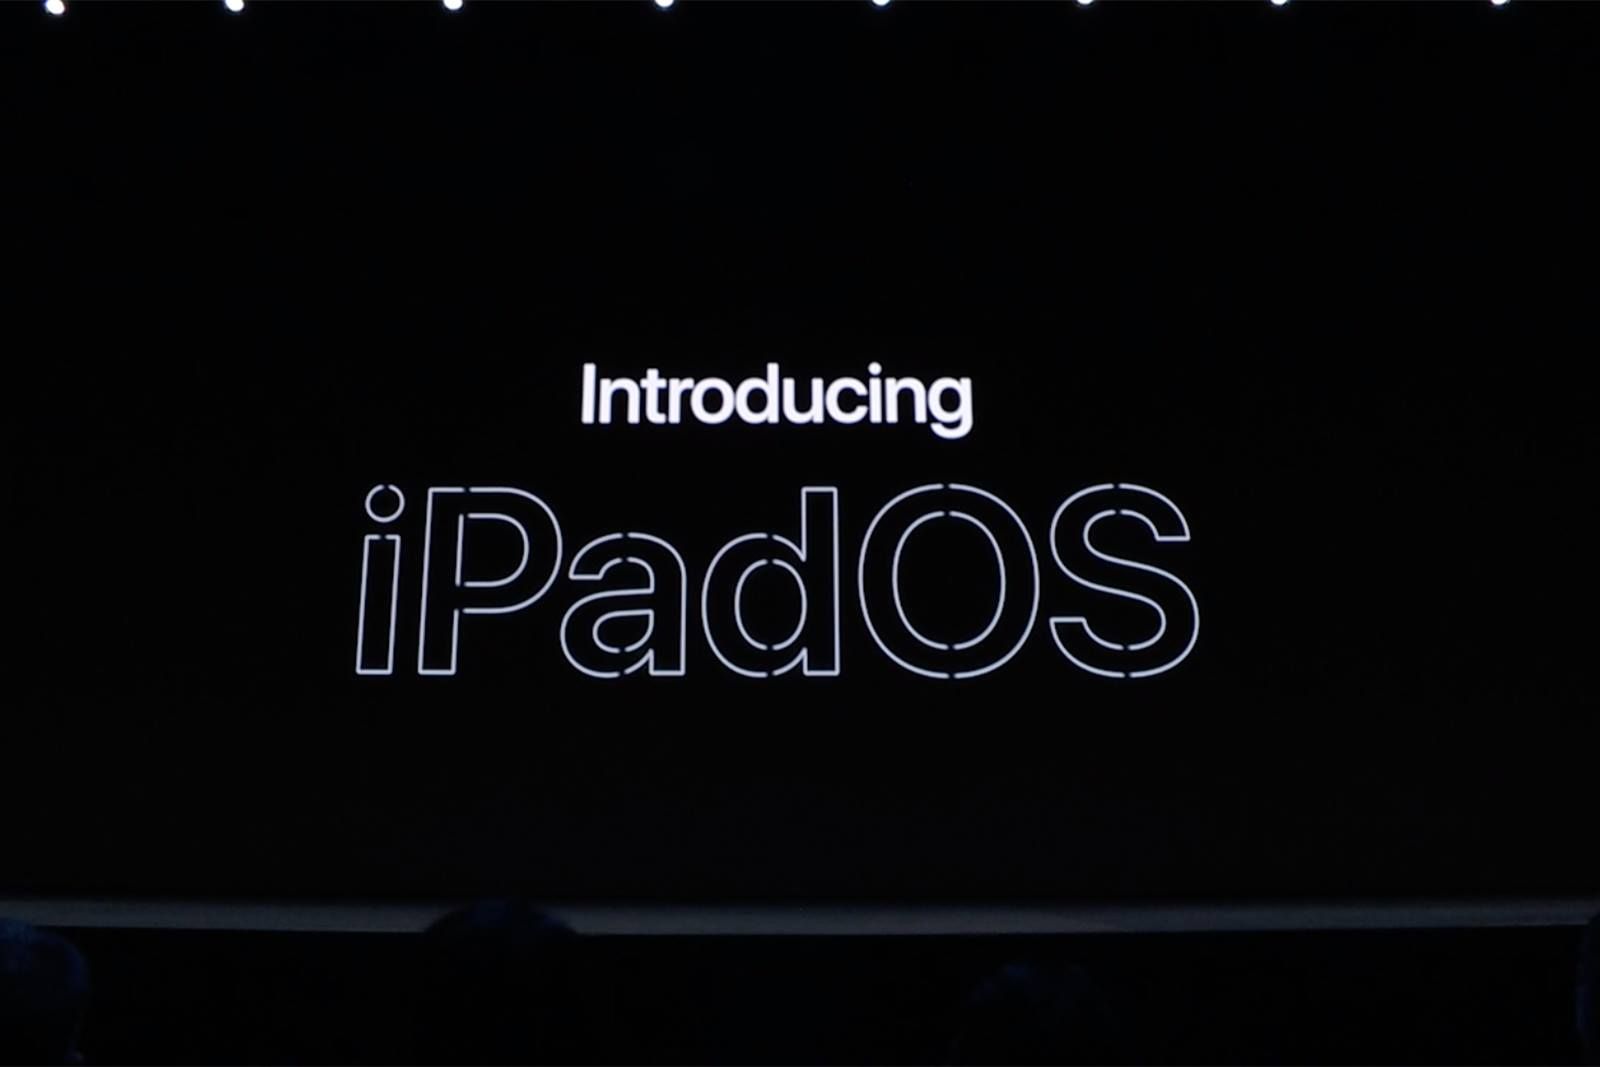 Ipados Leaks Out Apple Might Reveal New Os For Ipad At Wwdc 2019 image 2